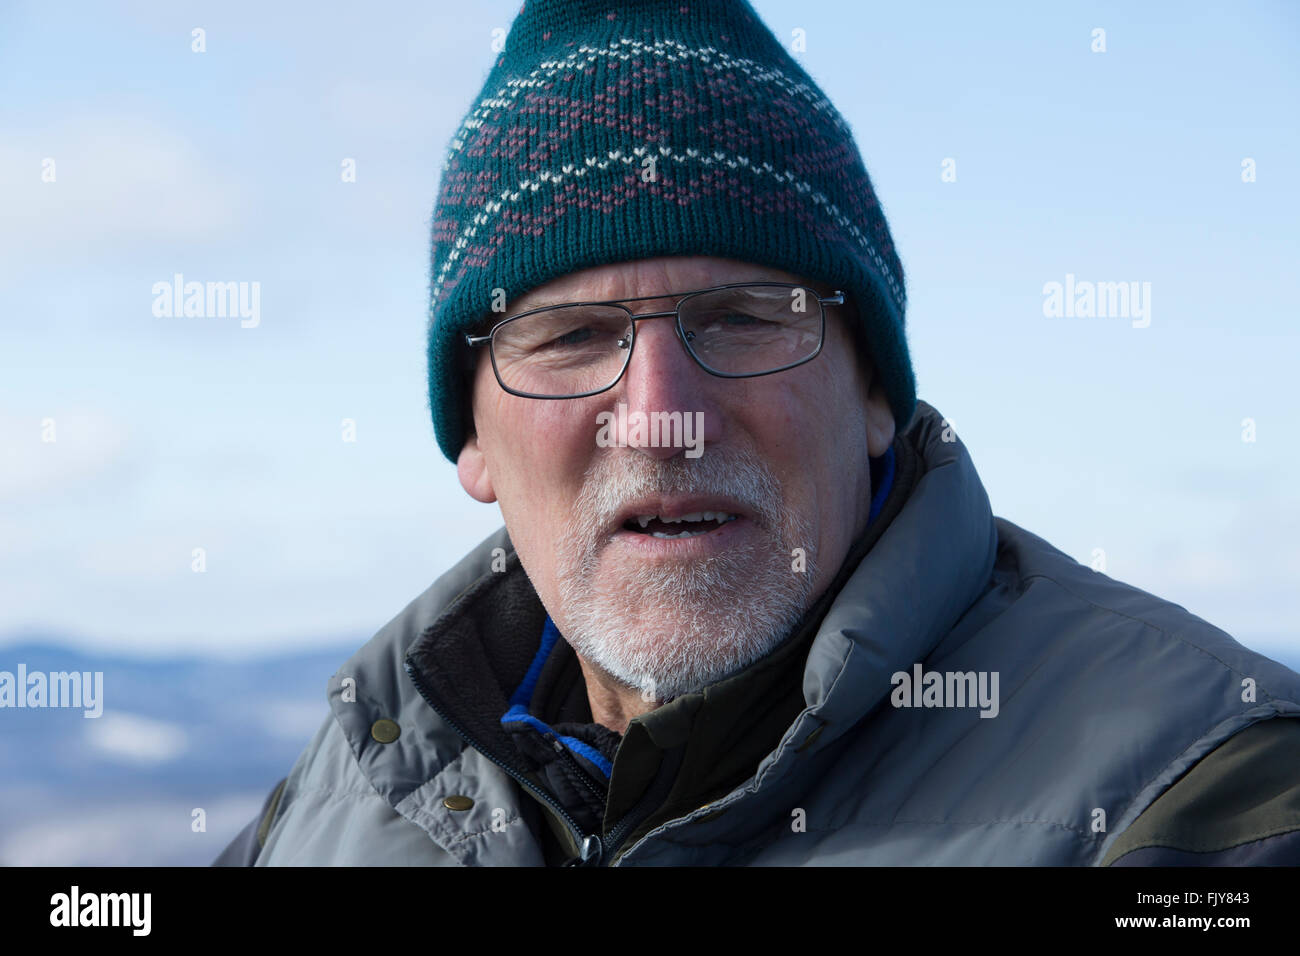 Senior man in cap and glasses on summit of Bald Mountain in winter, Rangeley, Maine. Stock Photo